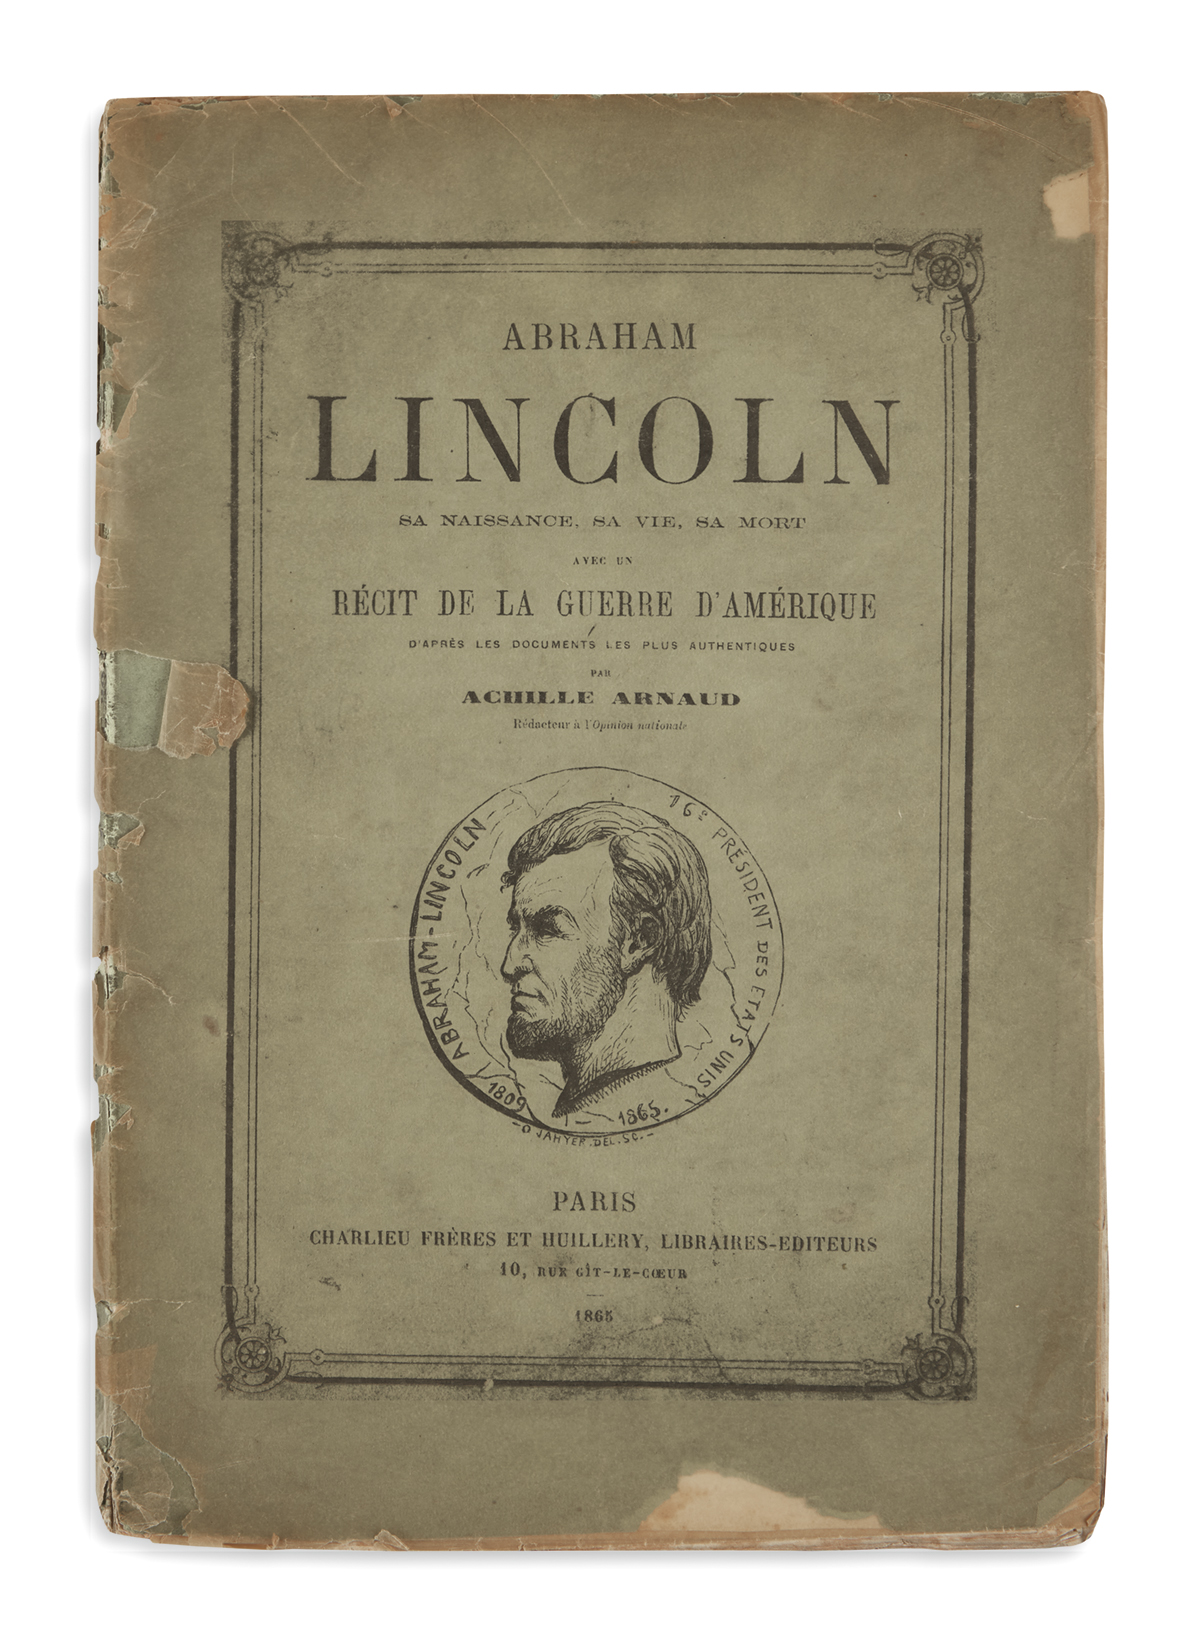 (BOOKS AND PAMPHLETS.) Group of 30 pamphlets on Lincoln and related topics.